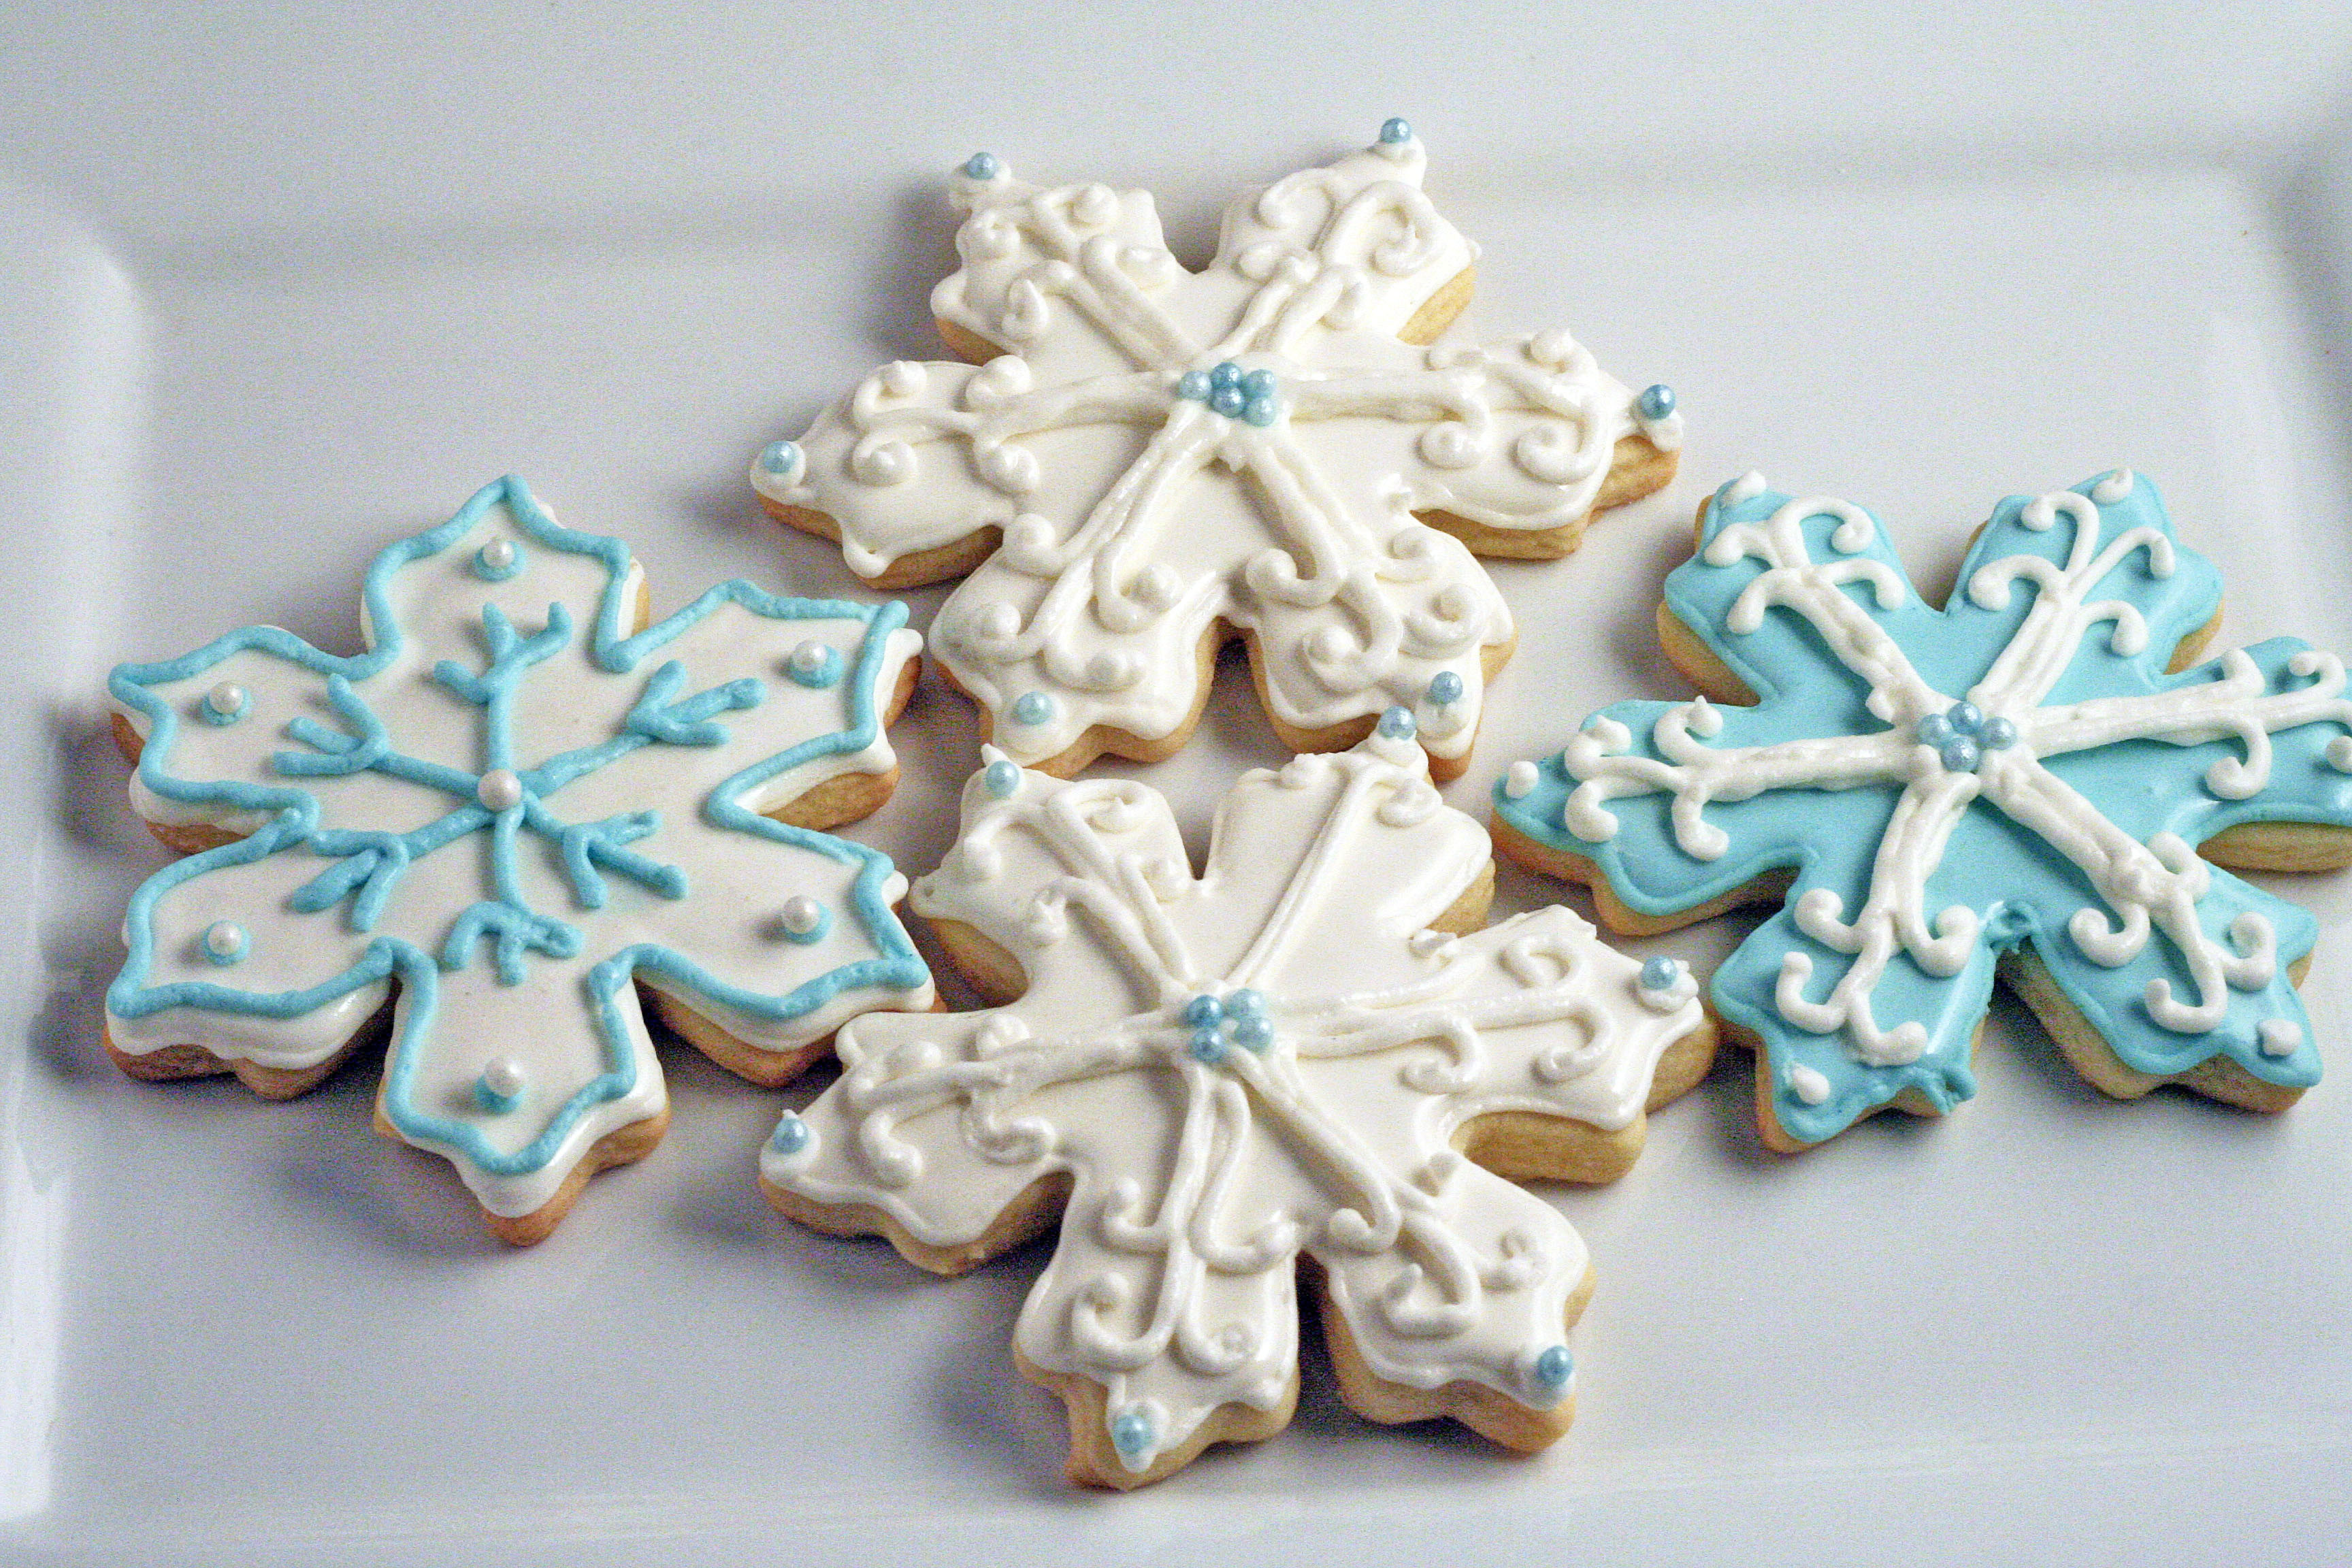 Decorated Christmas Sugar Cookies
 Decorated Christmas Sugar Cookies